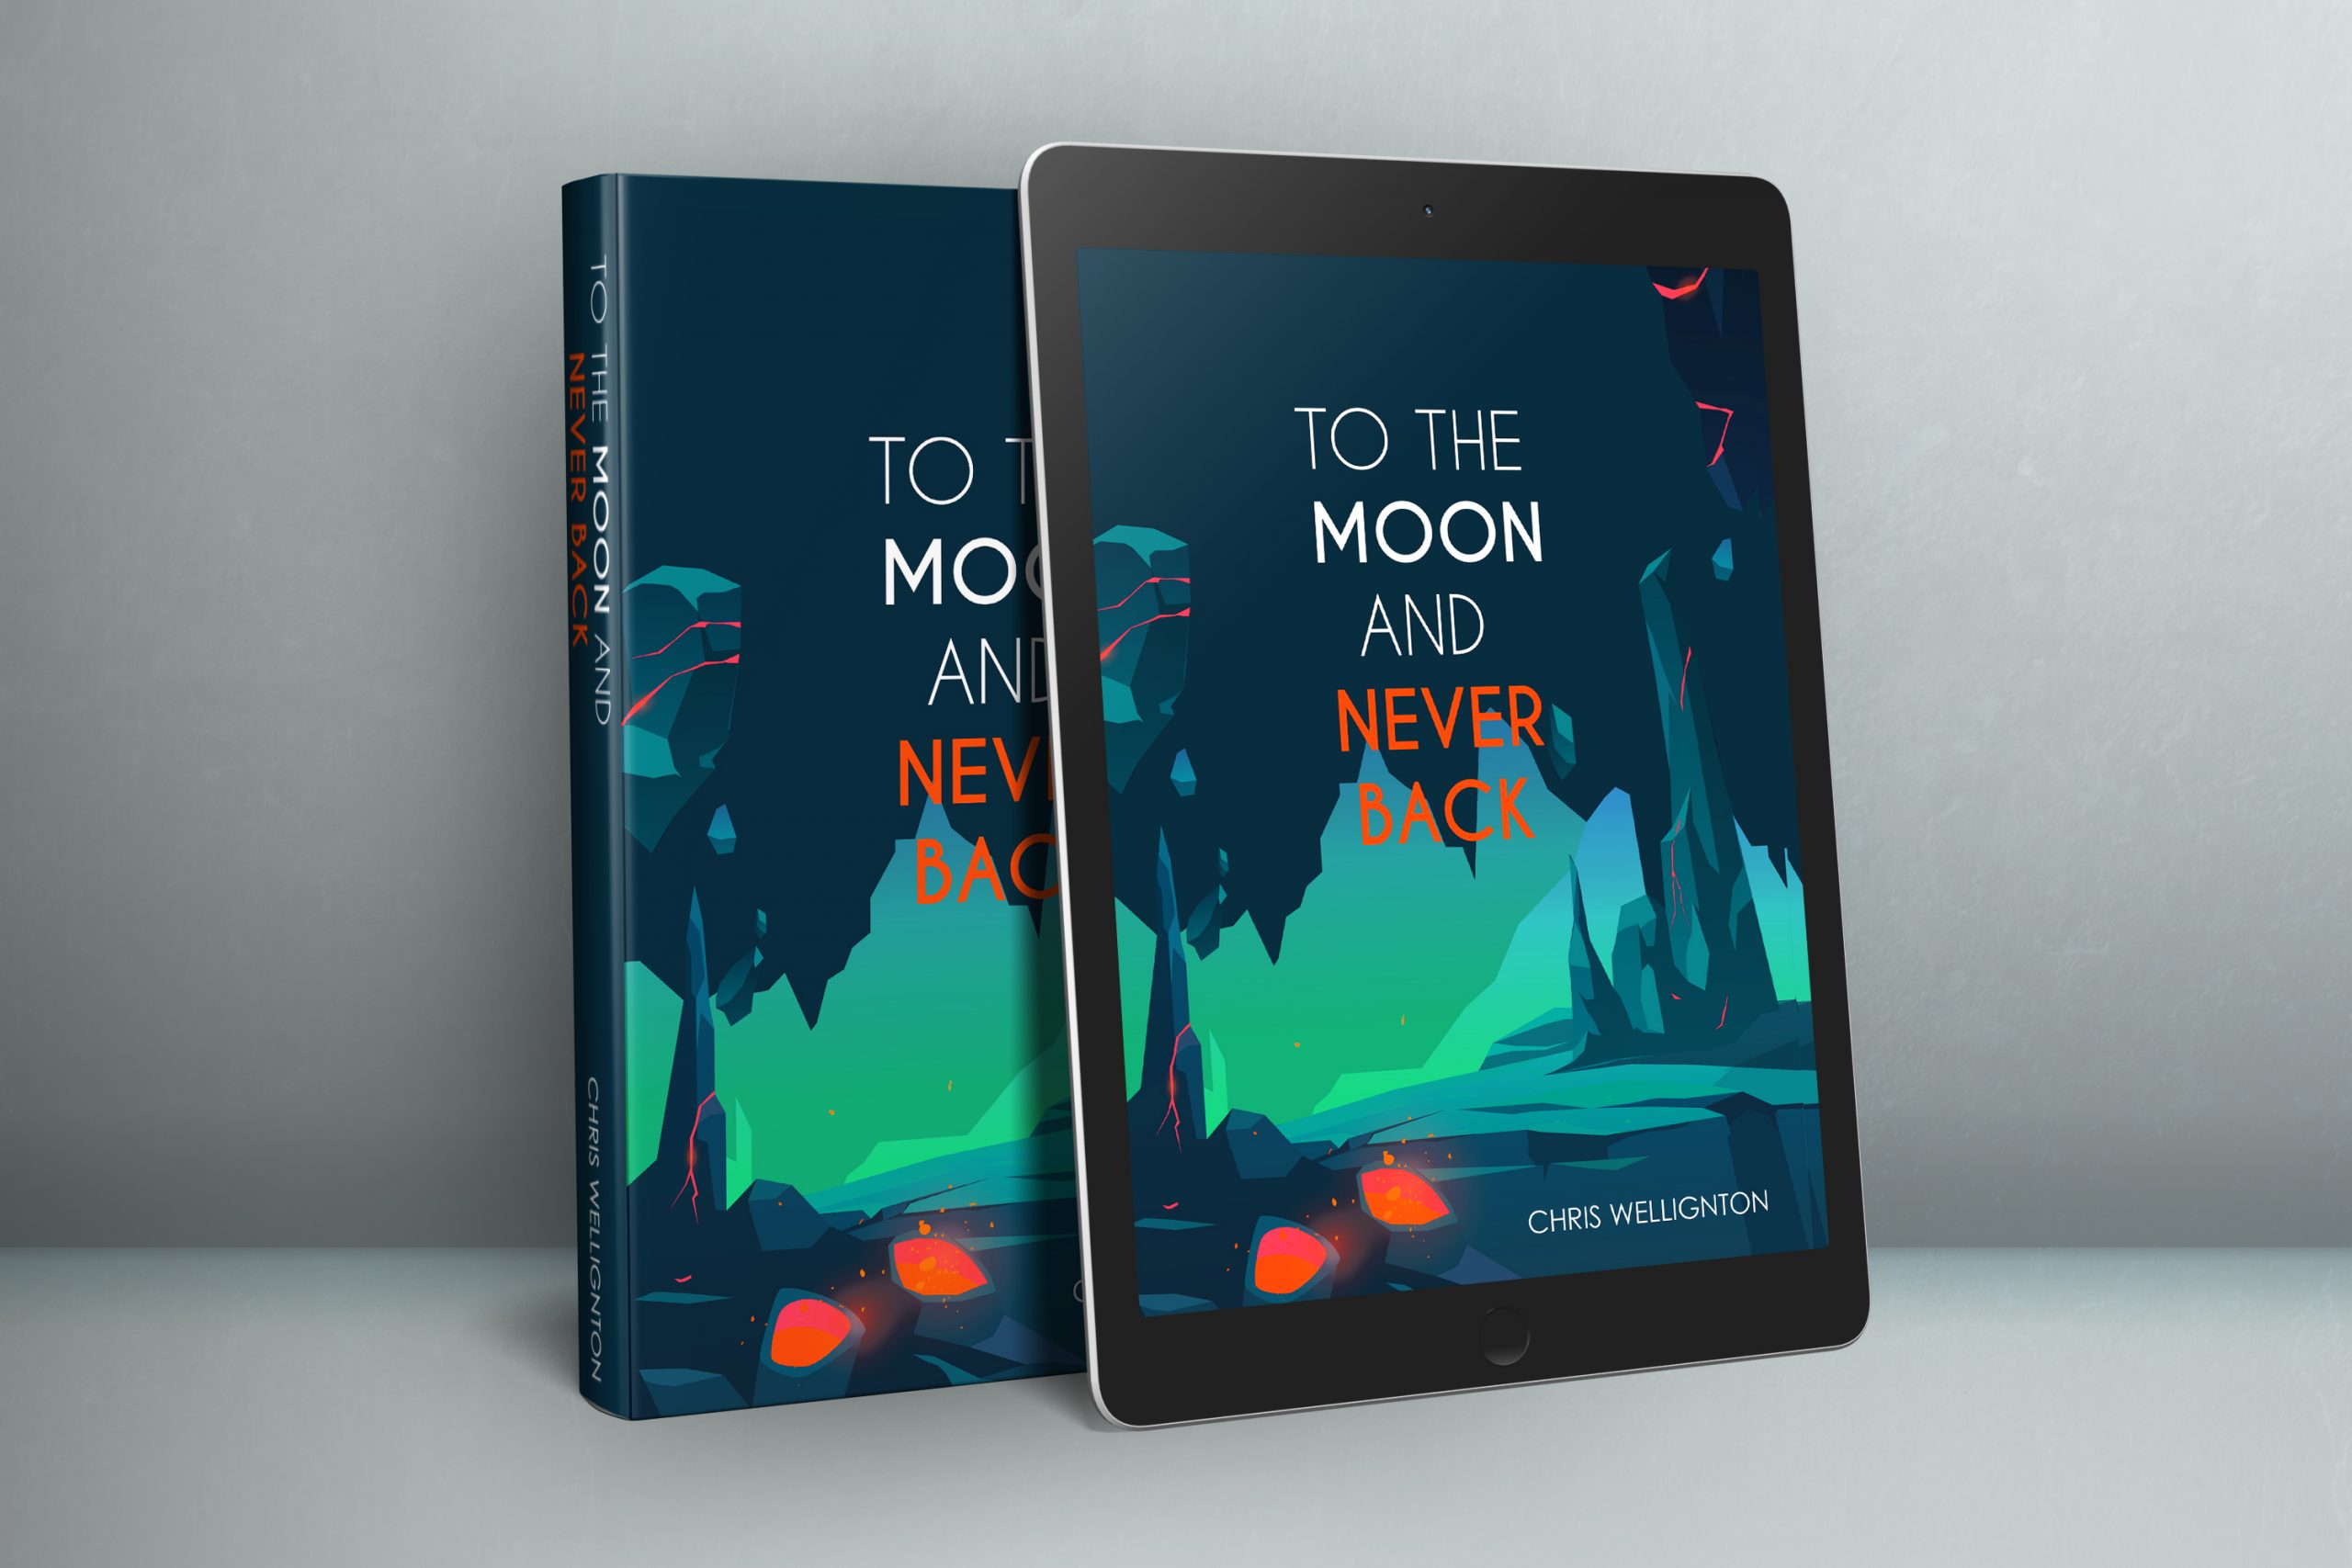 to-the-moon-and-never-back-cover-mockup